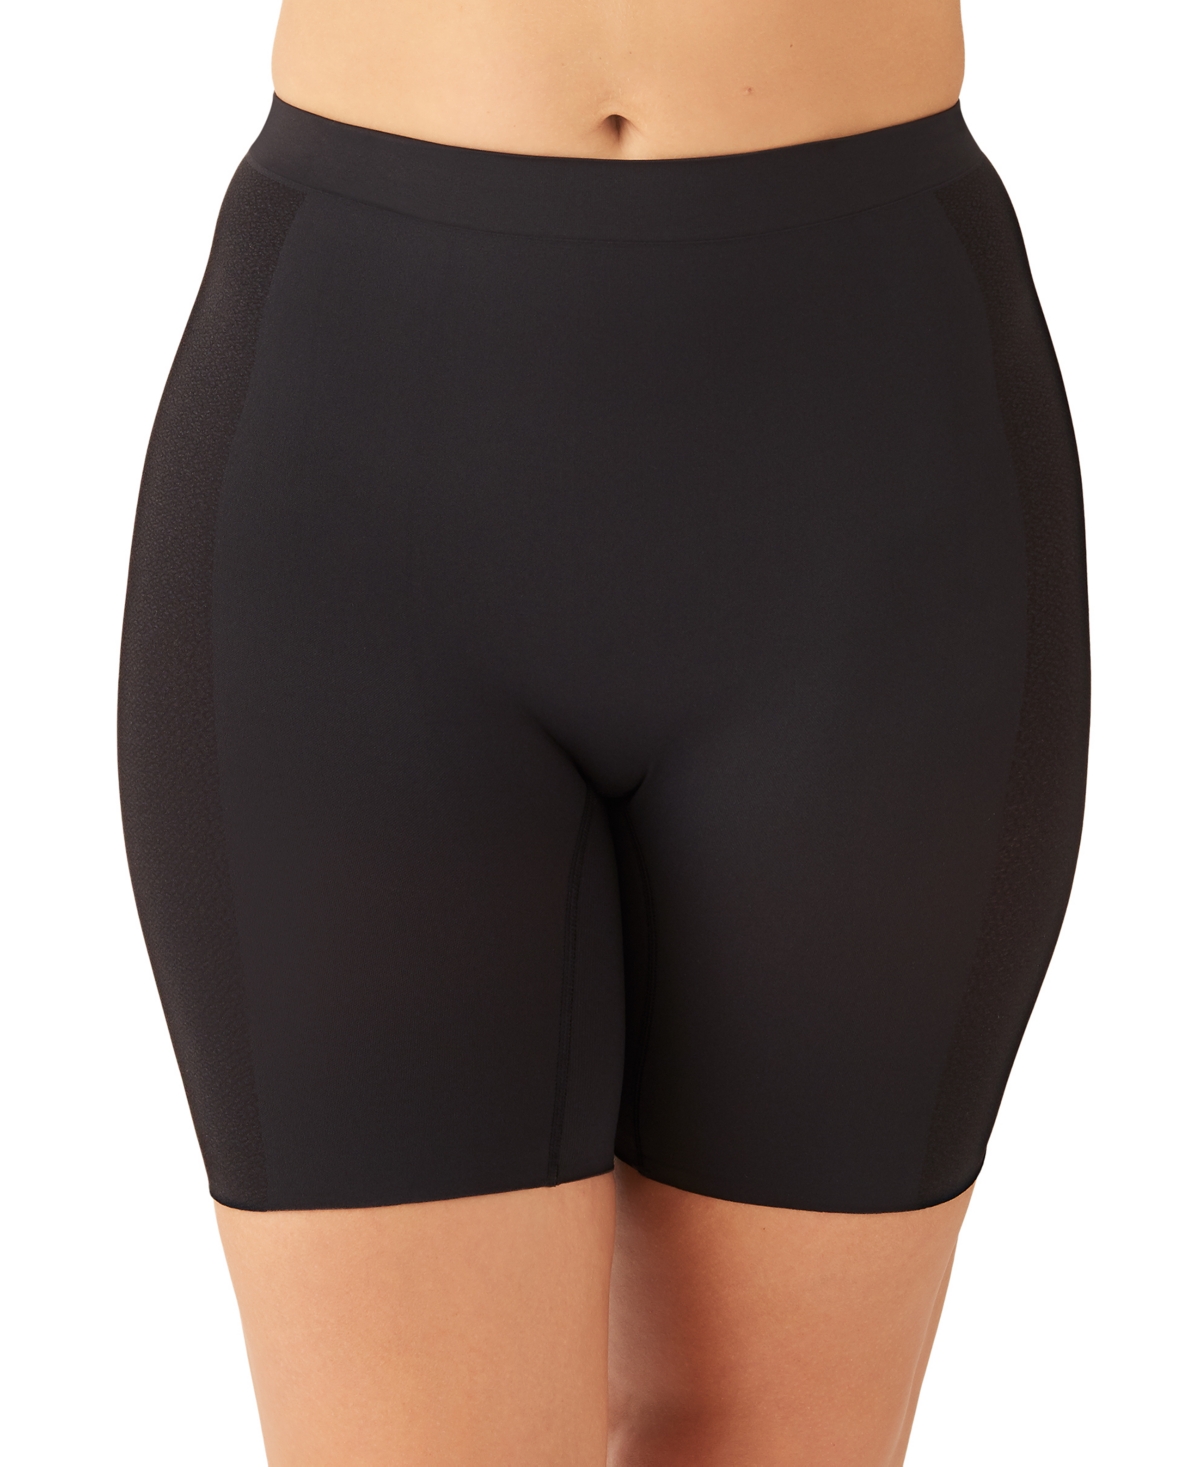 UPC 719544953252 product image for Wacoal Women's Keep Your Cool Thigh Shaper 805378 | upcitemdb.com